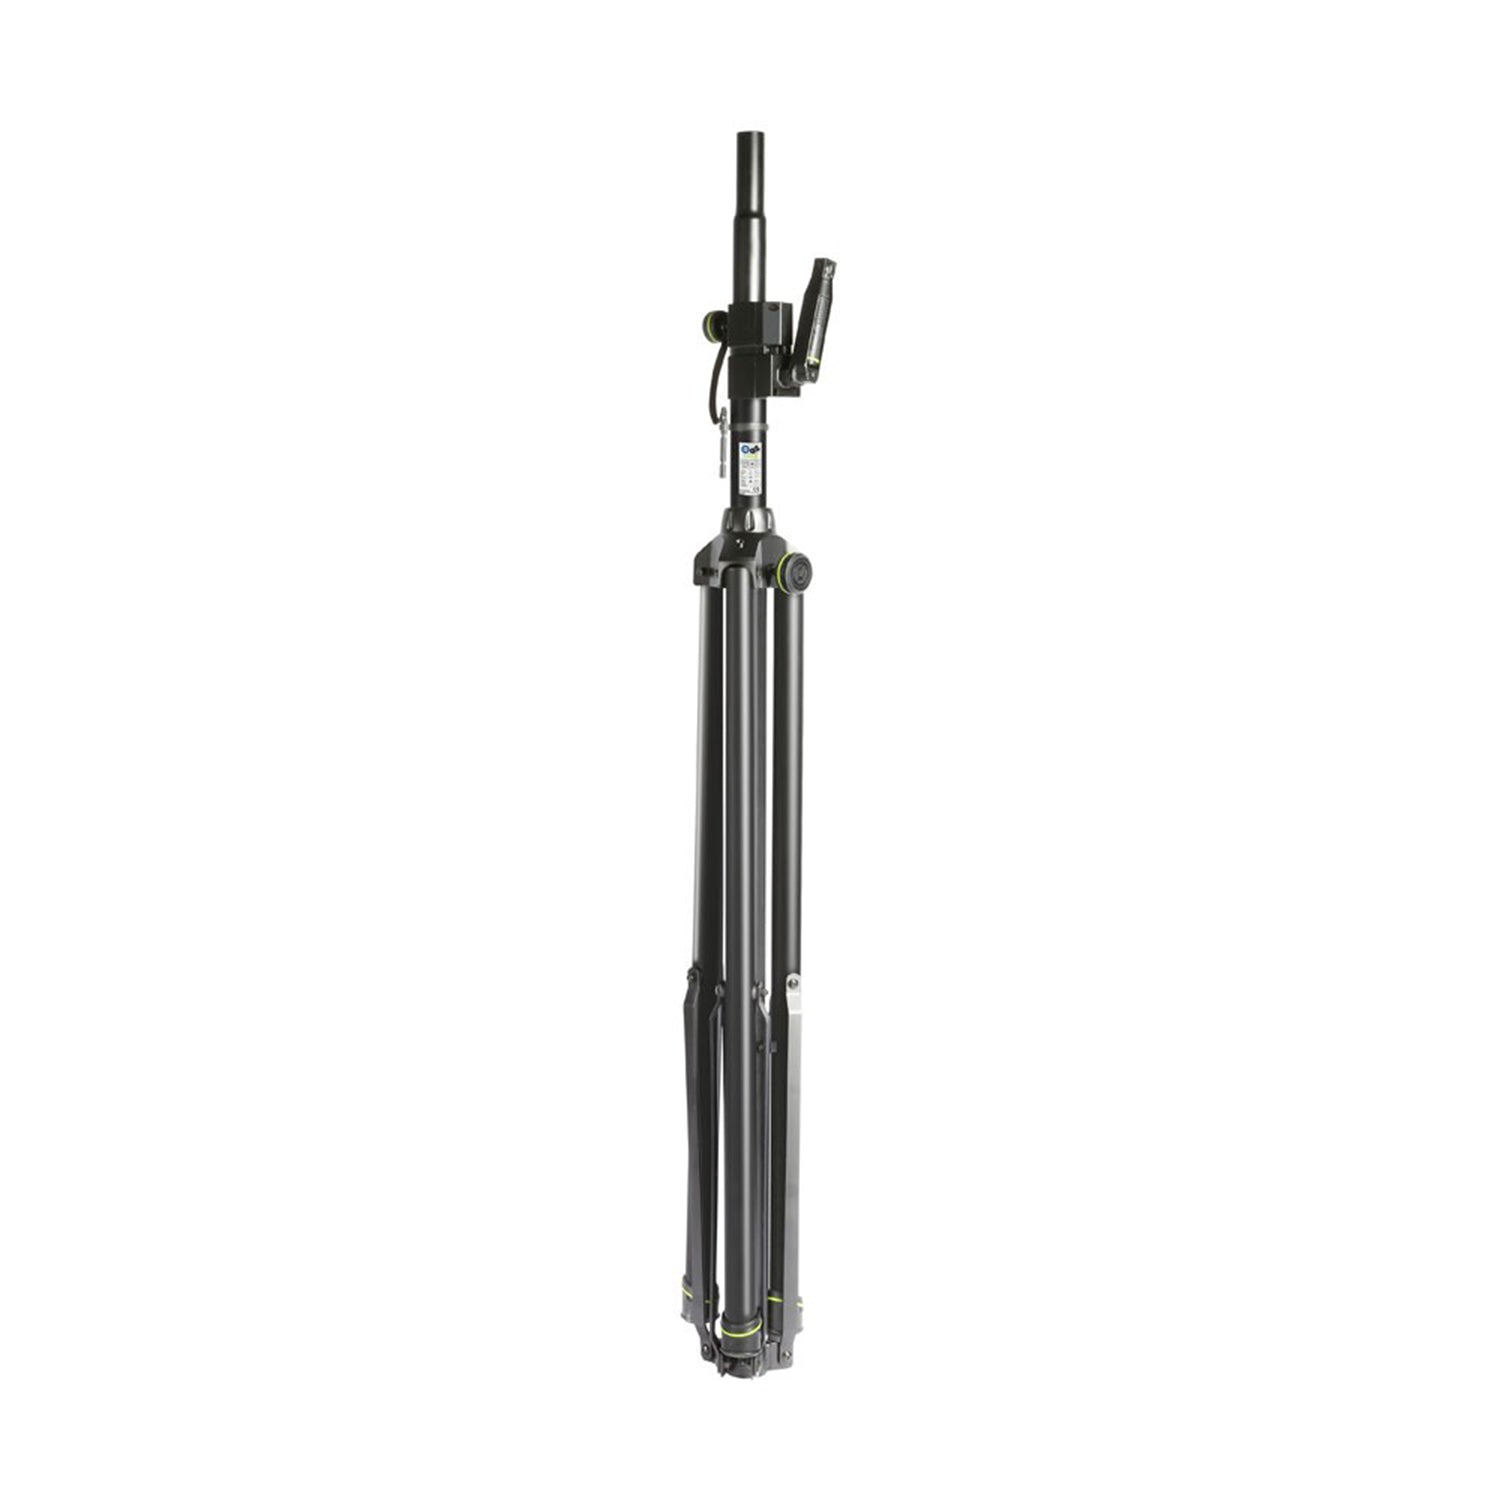 B-Stock: Gravity GSP4722B, Wind Up Speaker Crank Tripod Stand, Up To 7.2 ft by Gravity